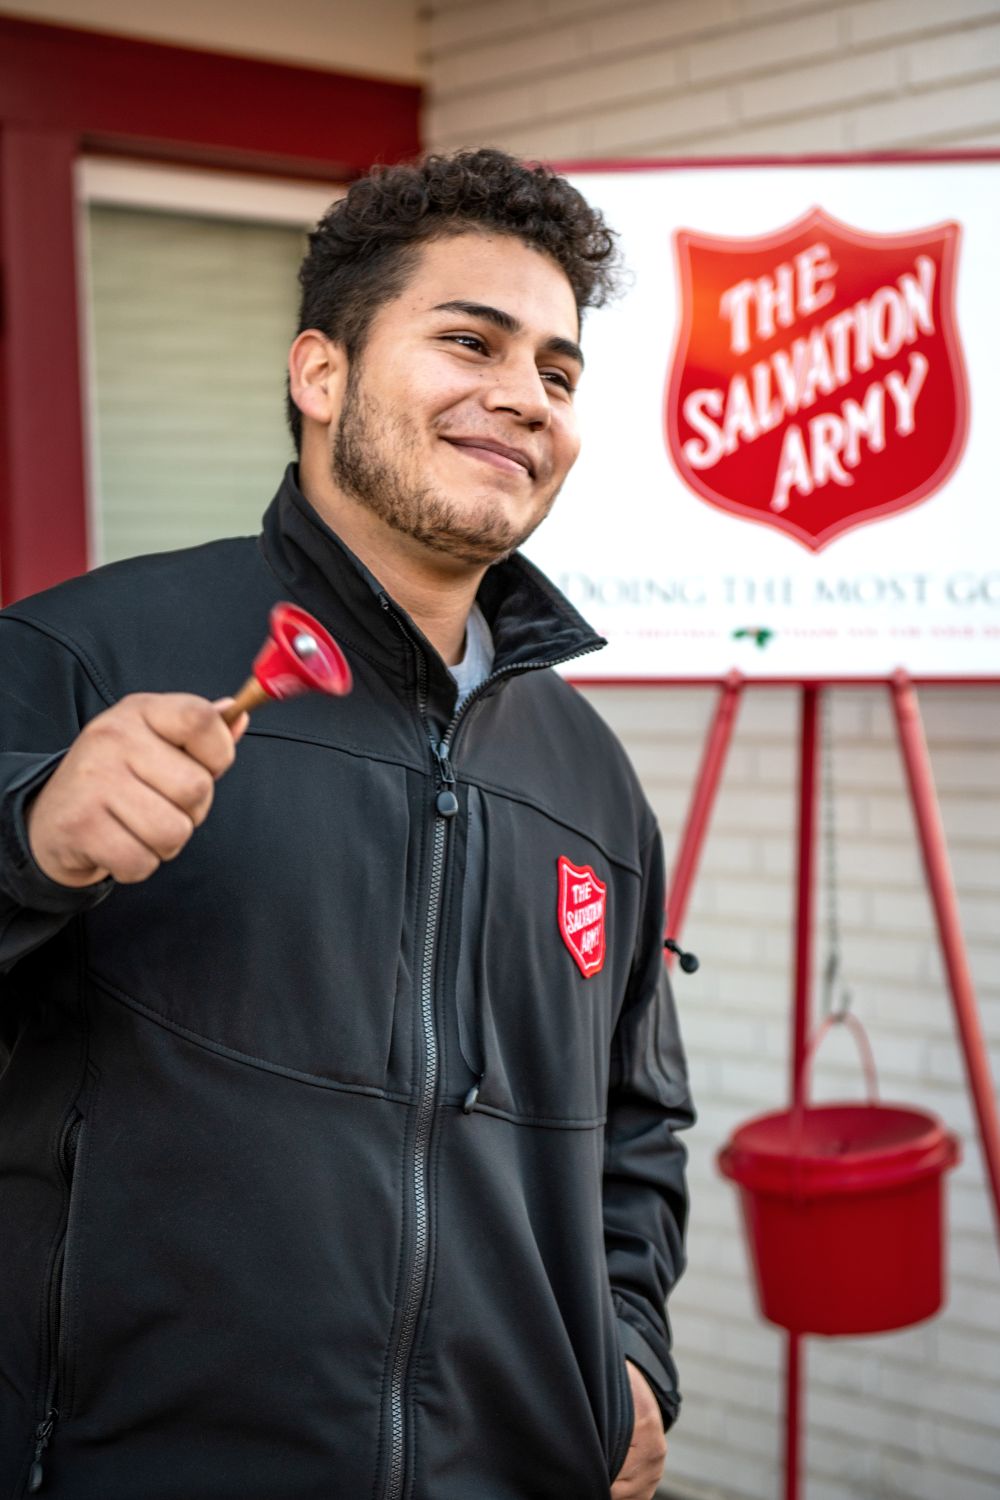 A young latino looking man rings a bell smiling, with a Salvation Army placard in the background.